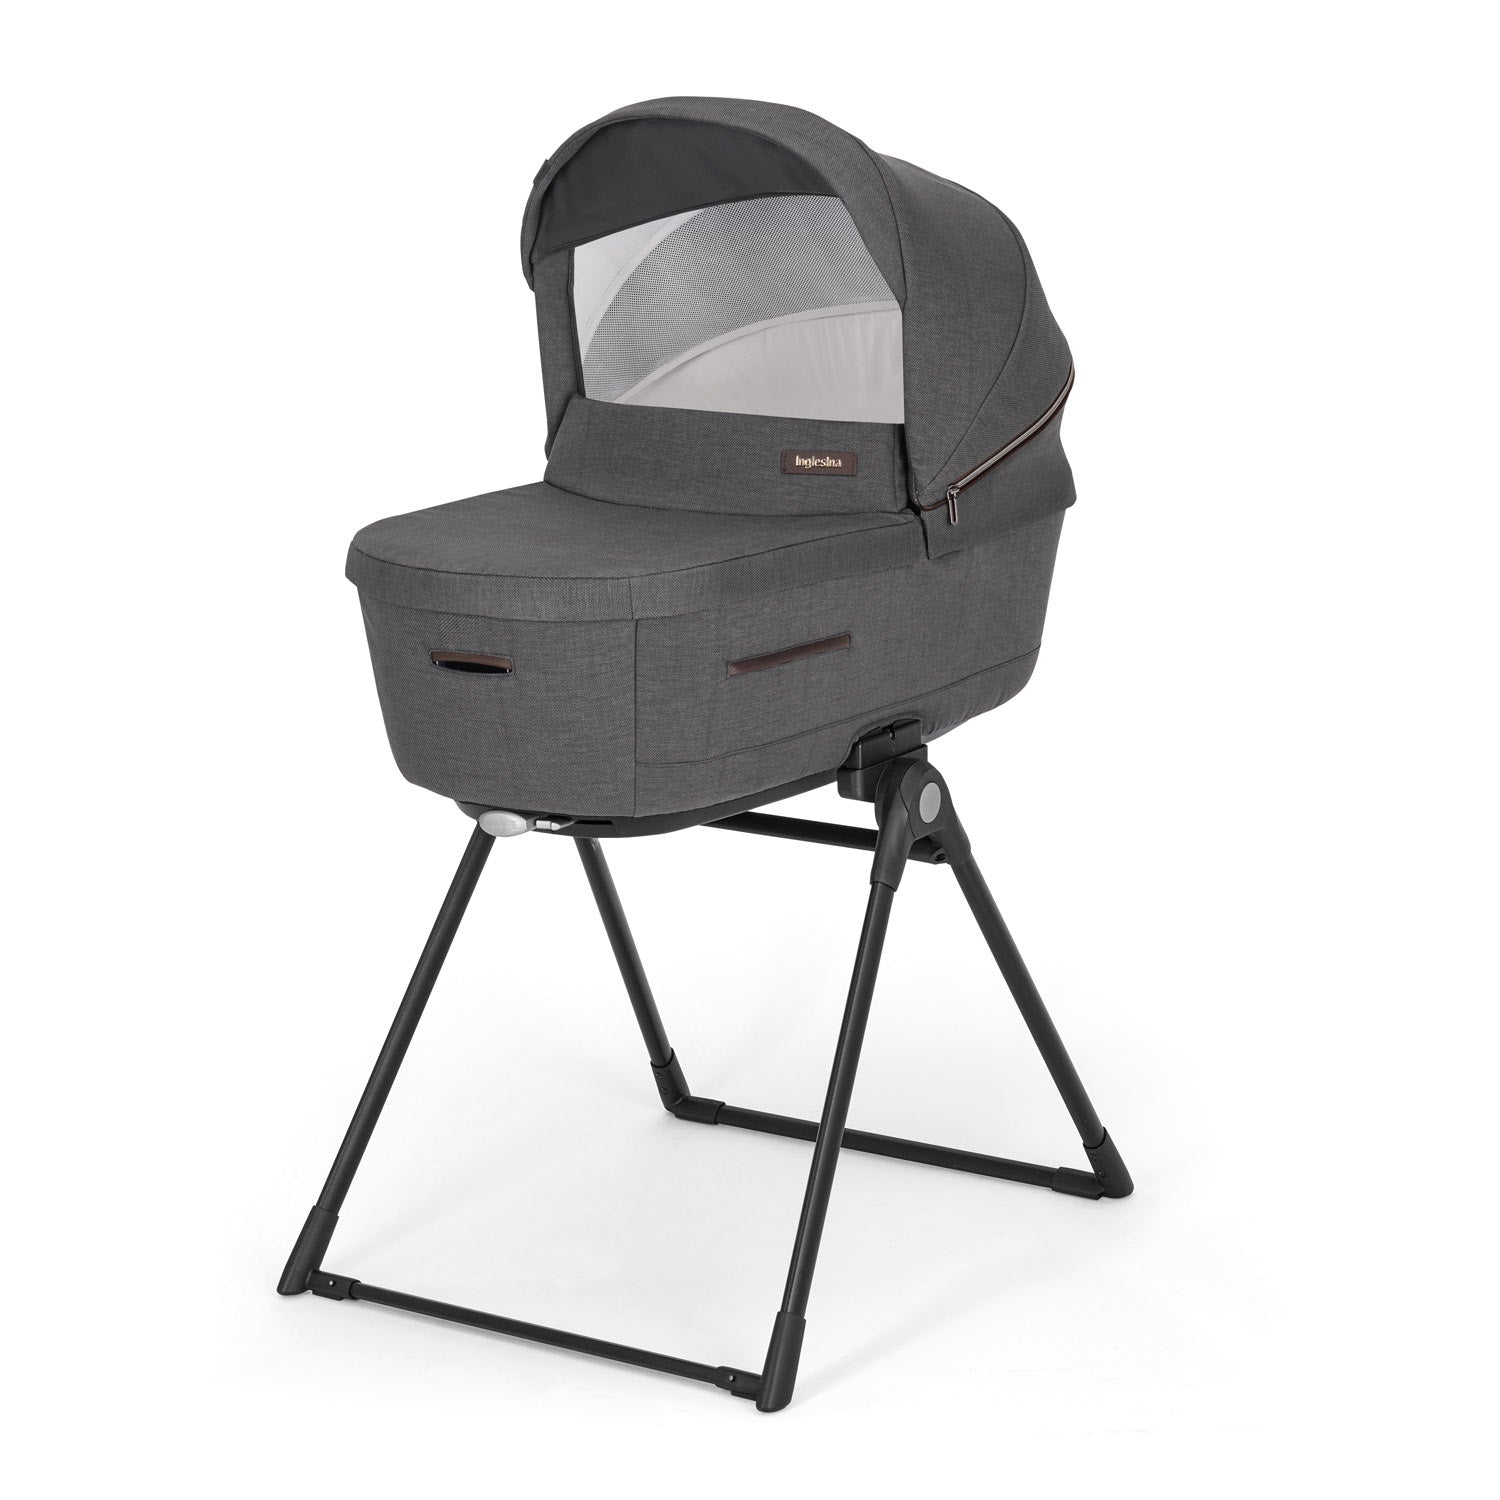 Aptica System Velvet Grey, chassis color Palladio, car seat Darwin Infant Recline and 360° i-Size base